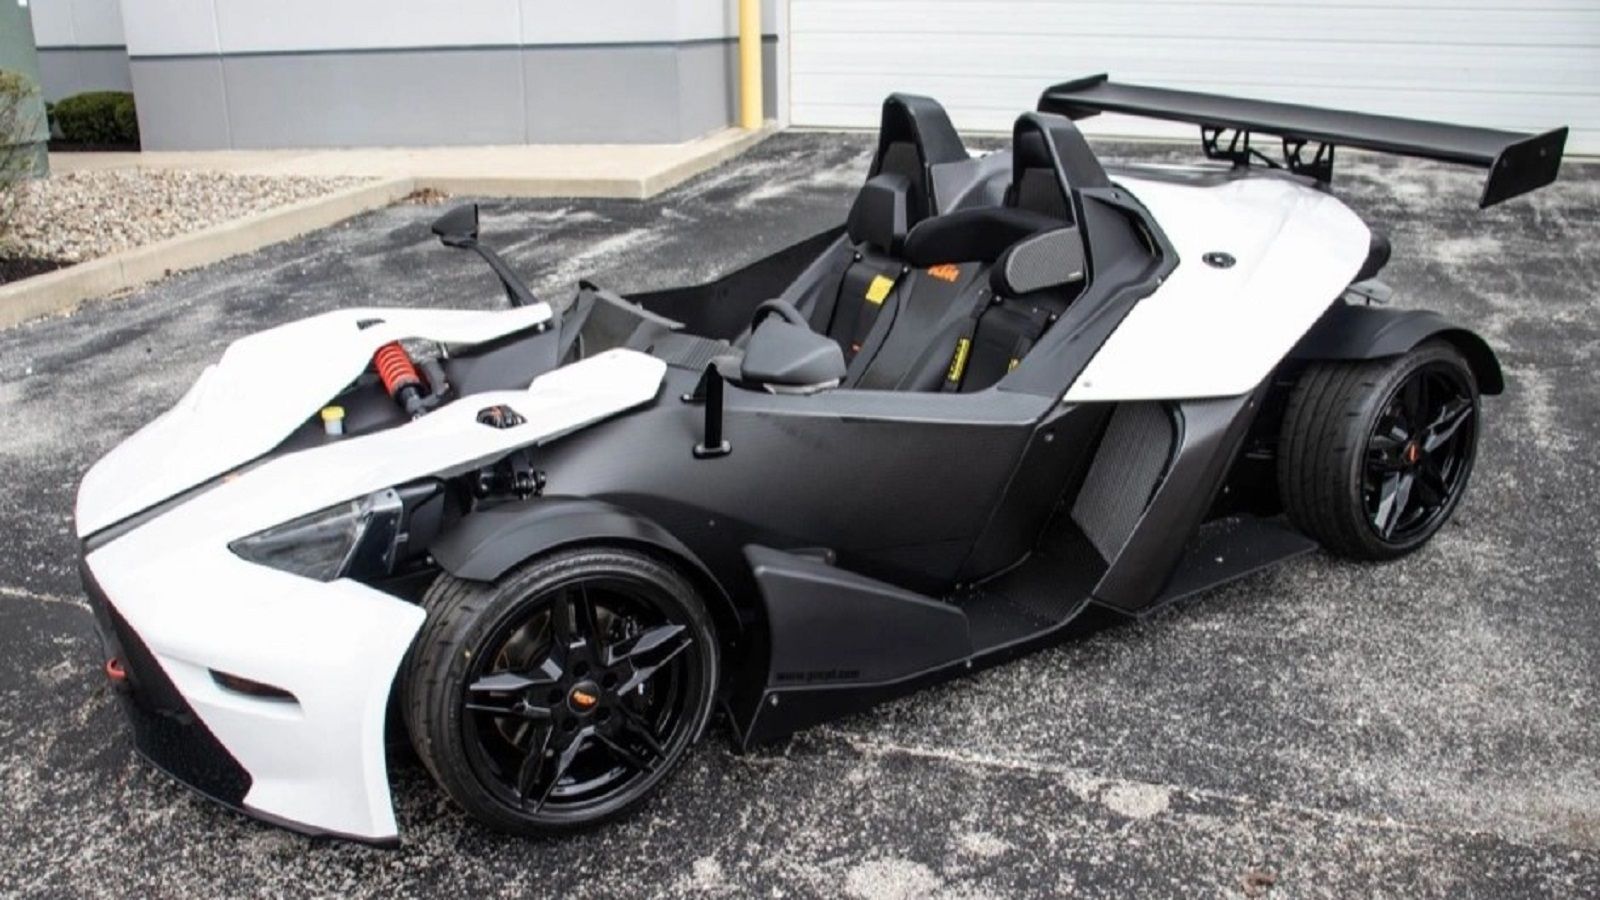 A parked 2017 KTM X-Bow R